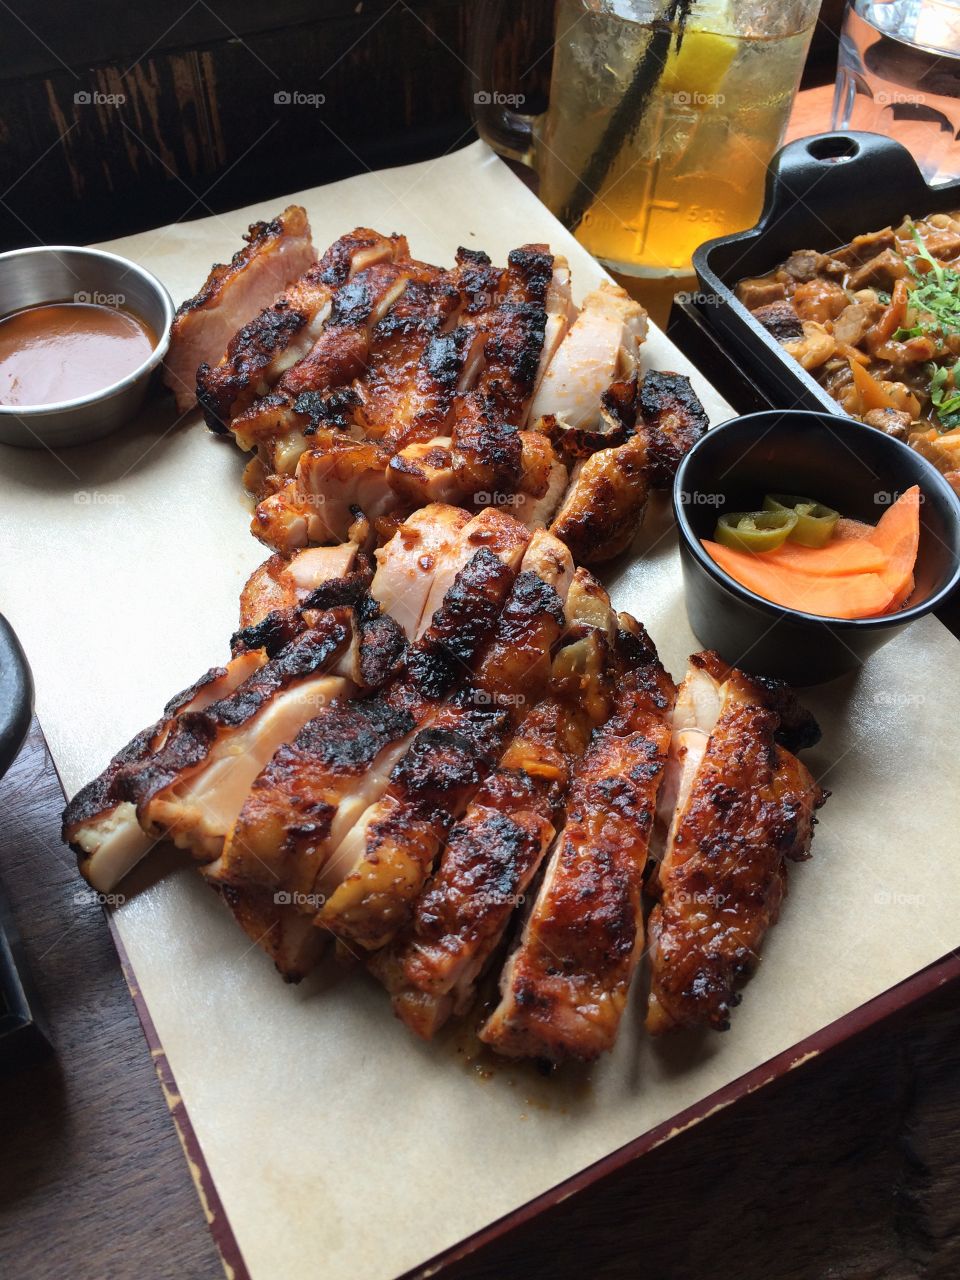 Smoked chicken . Delicious BBQ smoked chicken on a wooden plate